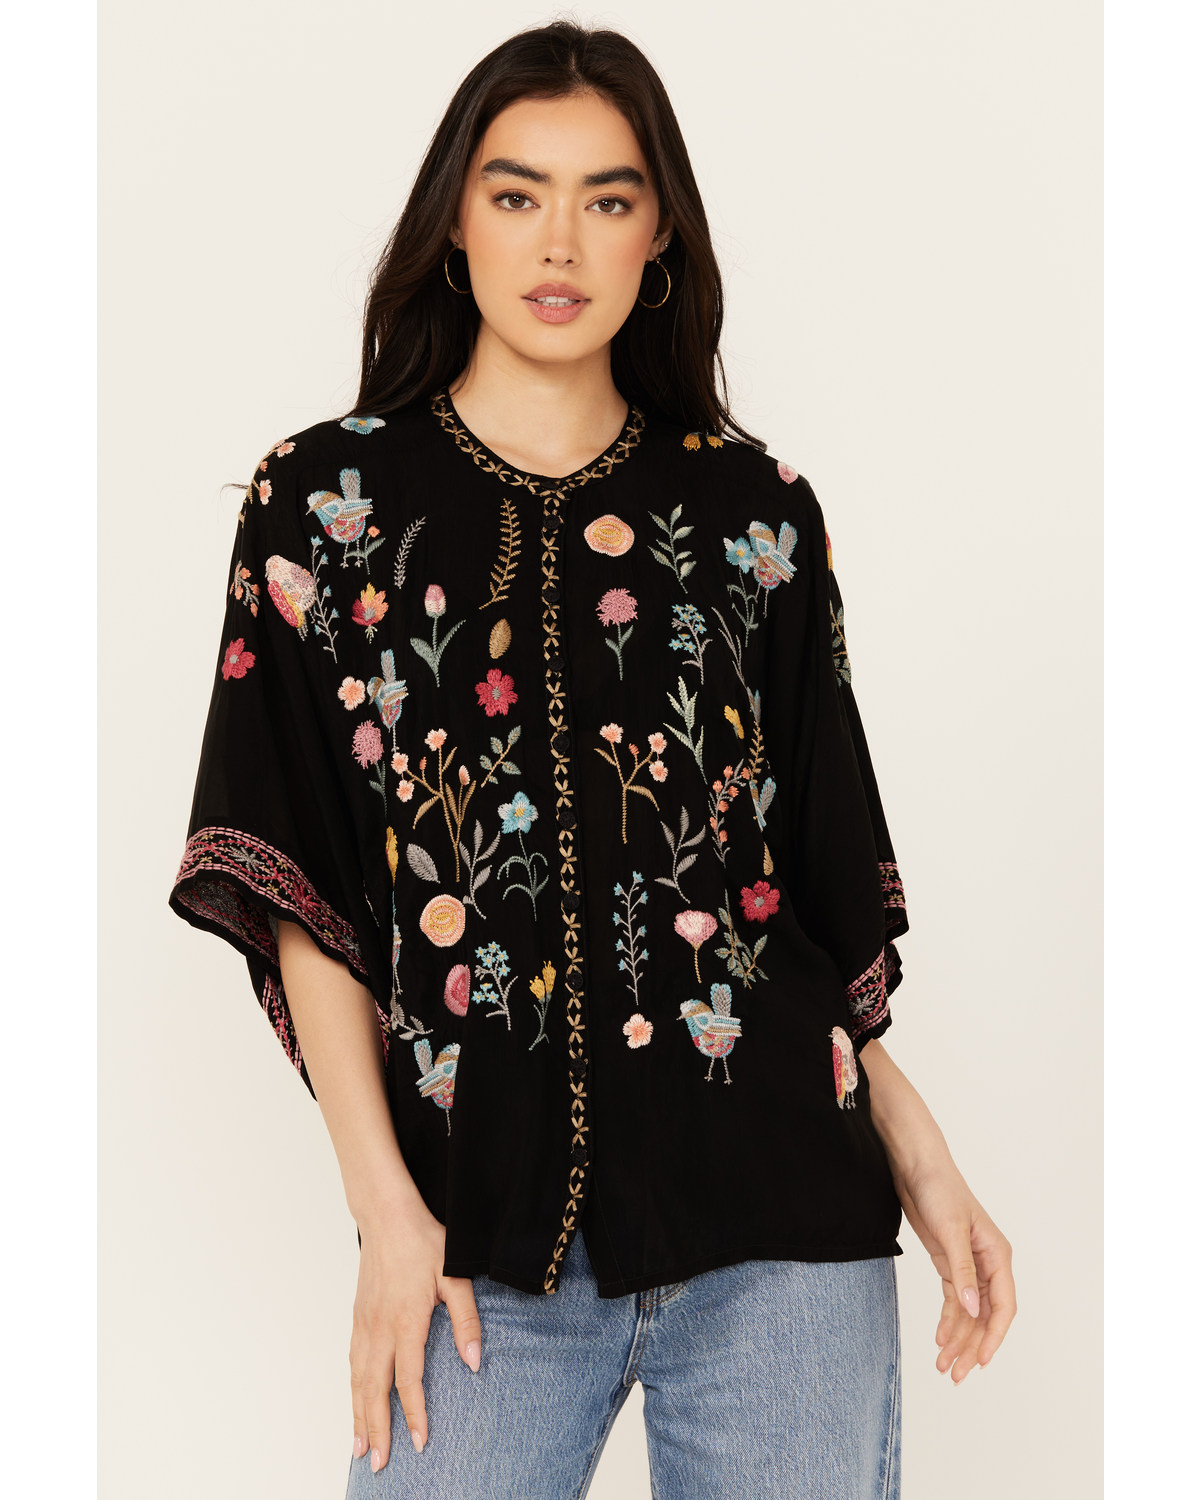 Johnny Was Women's Floral Embroidered V Neck Blouse